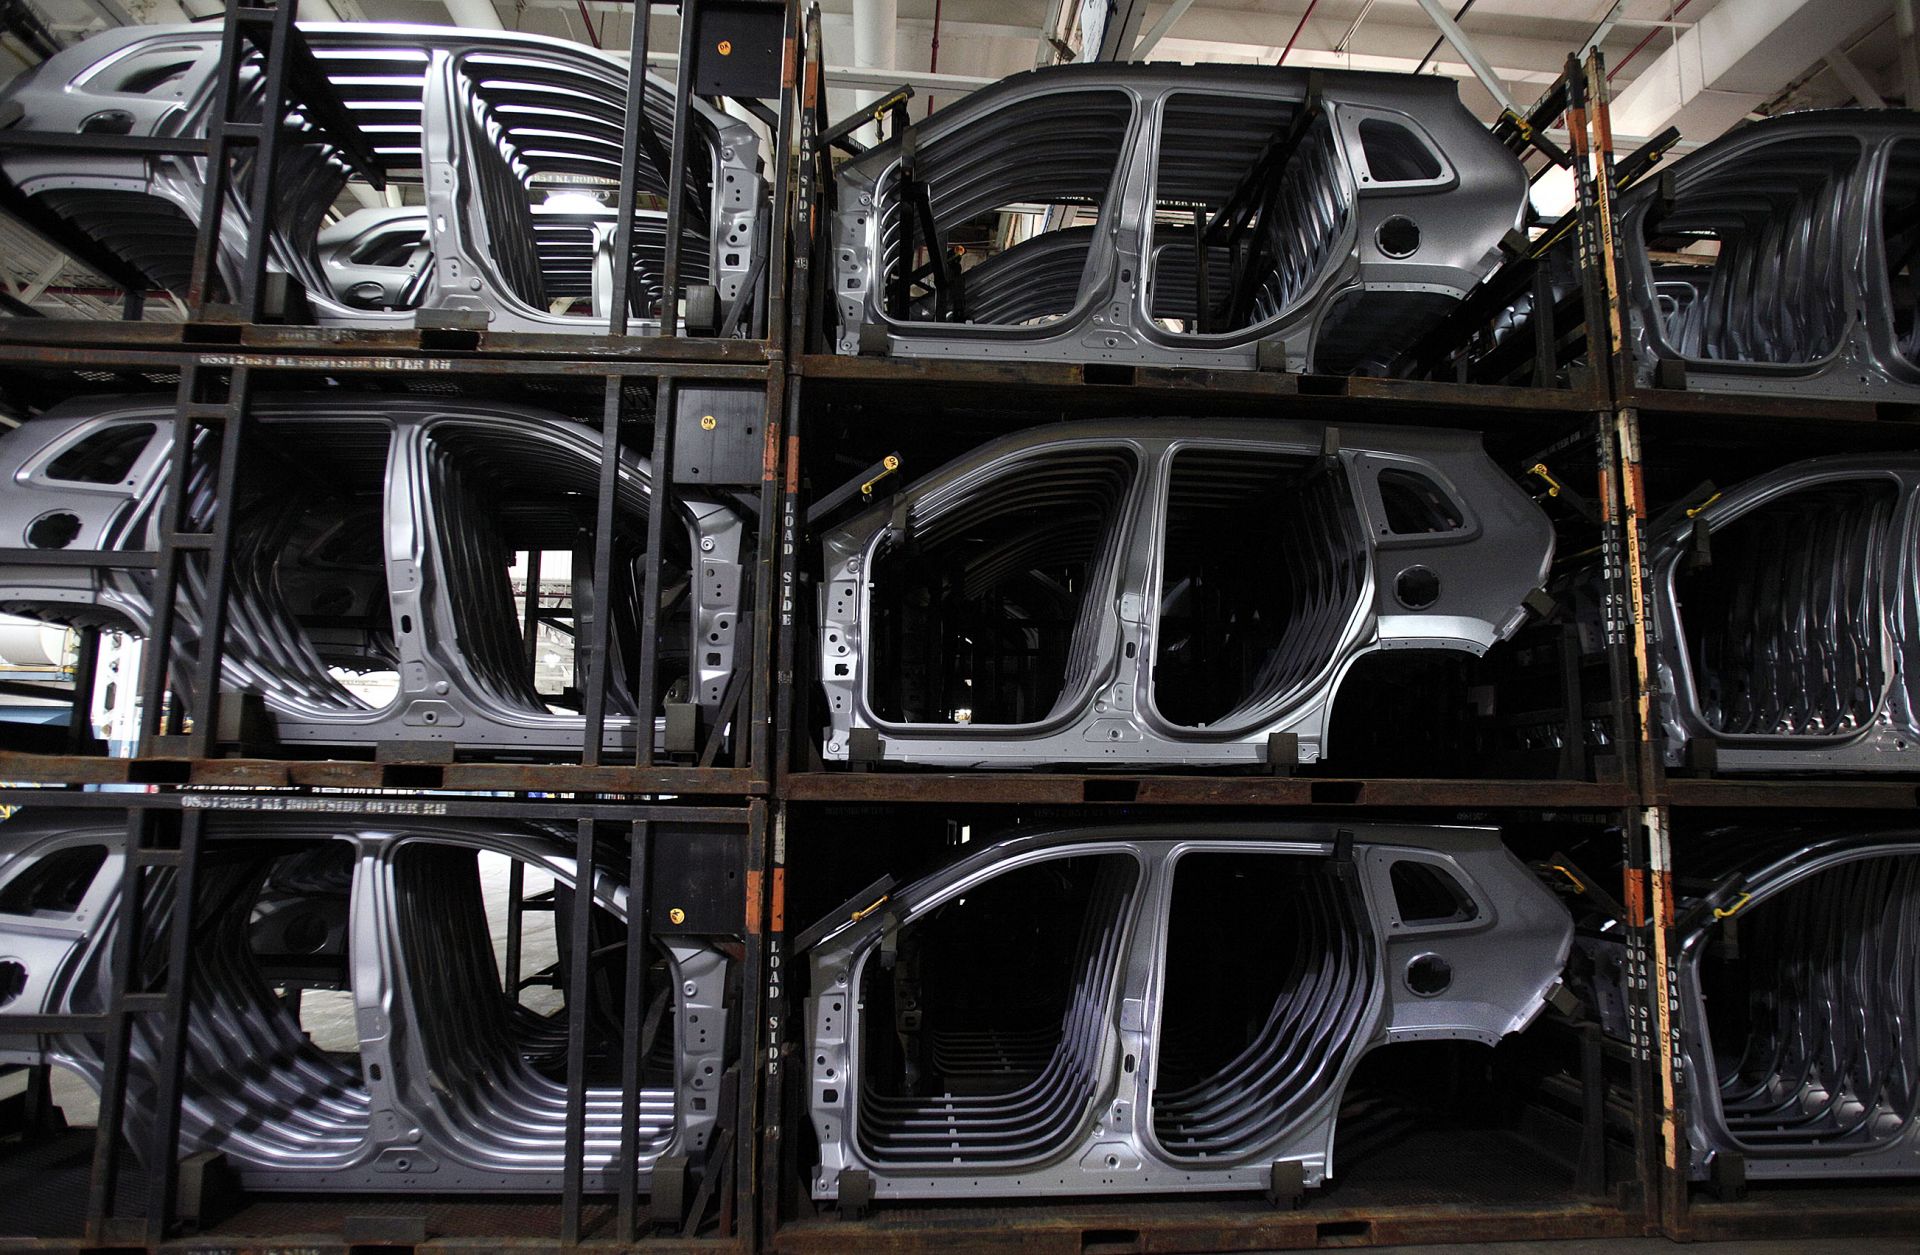 A Fiat Chrysler plant in Michigan displays auto body parts.